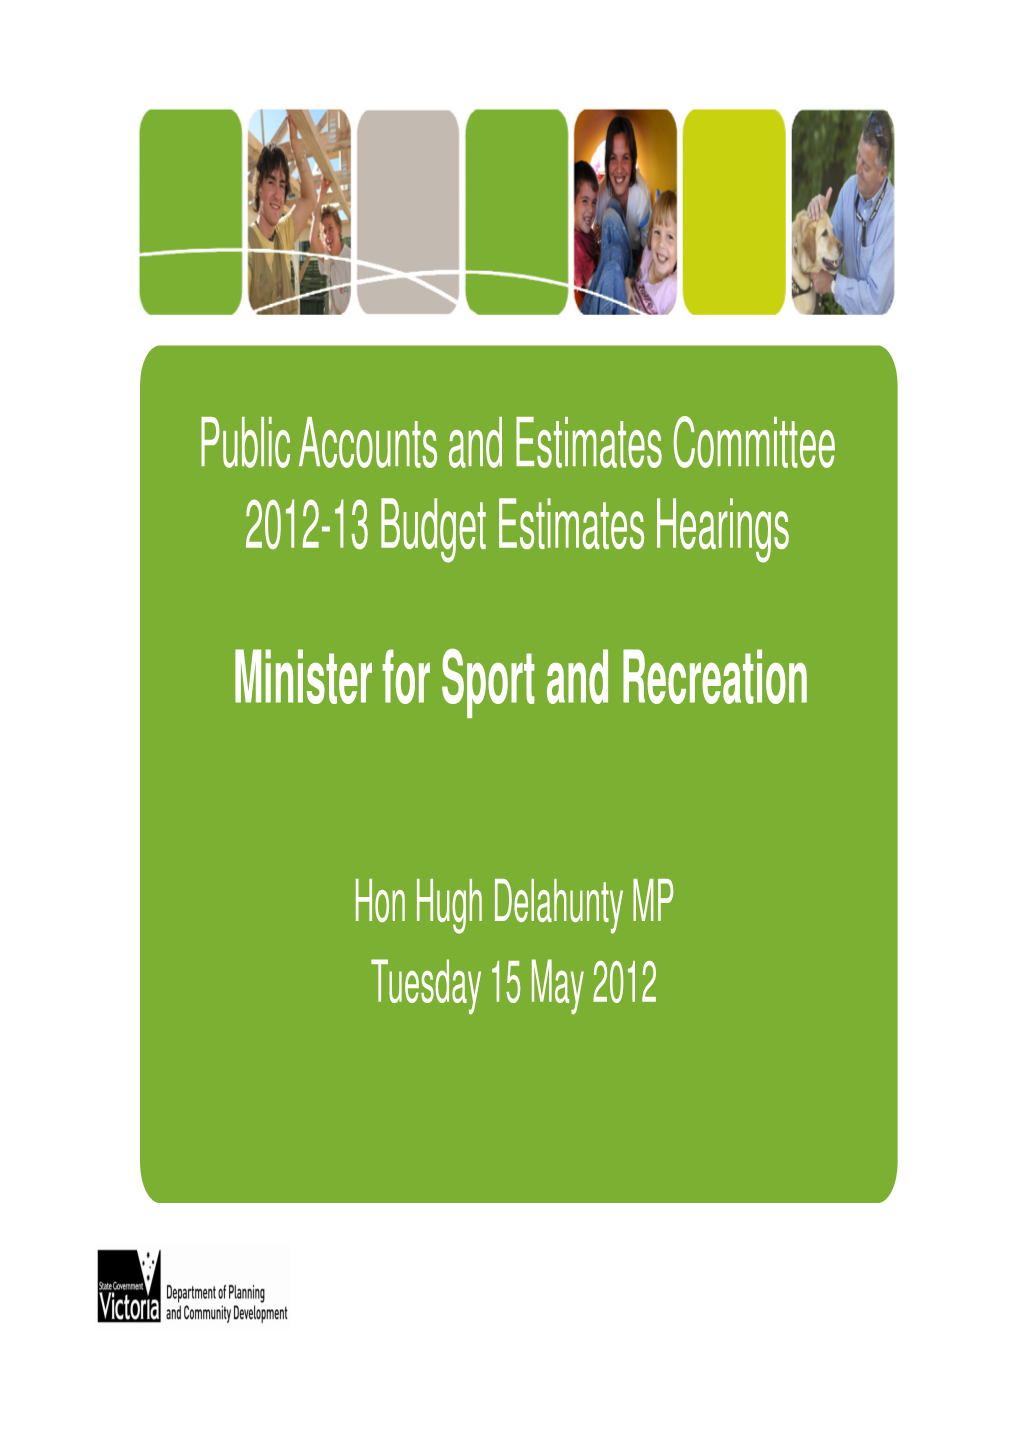 Minister for Sport and Recreation